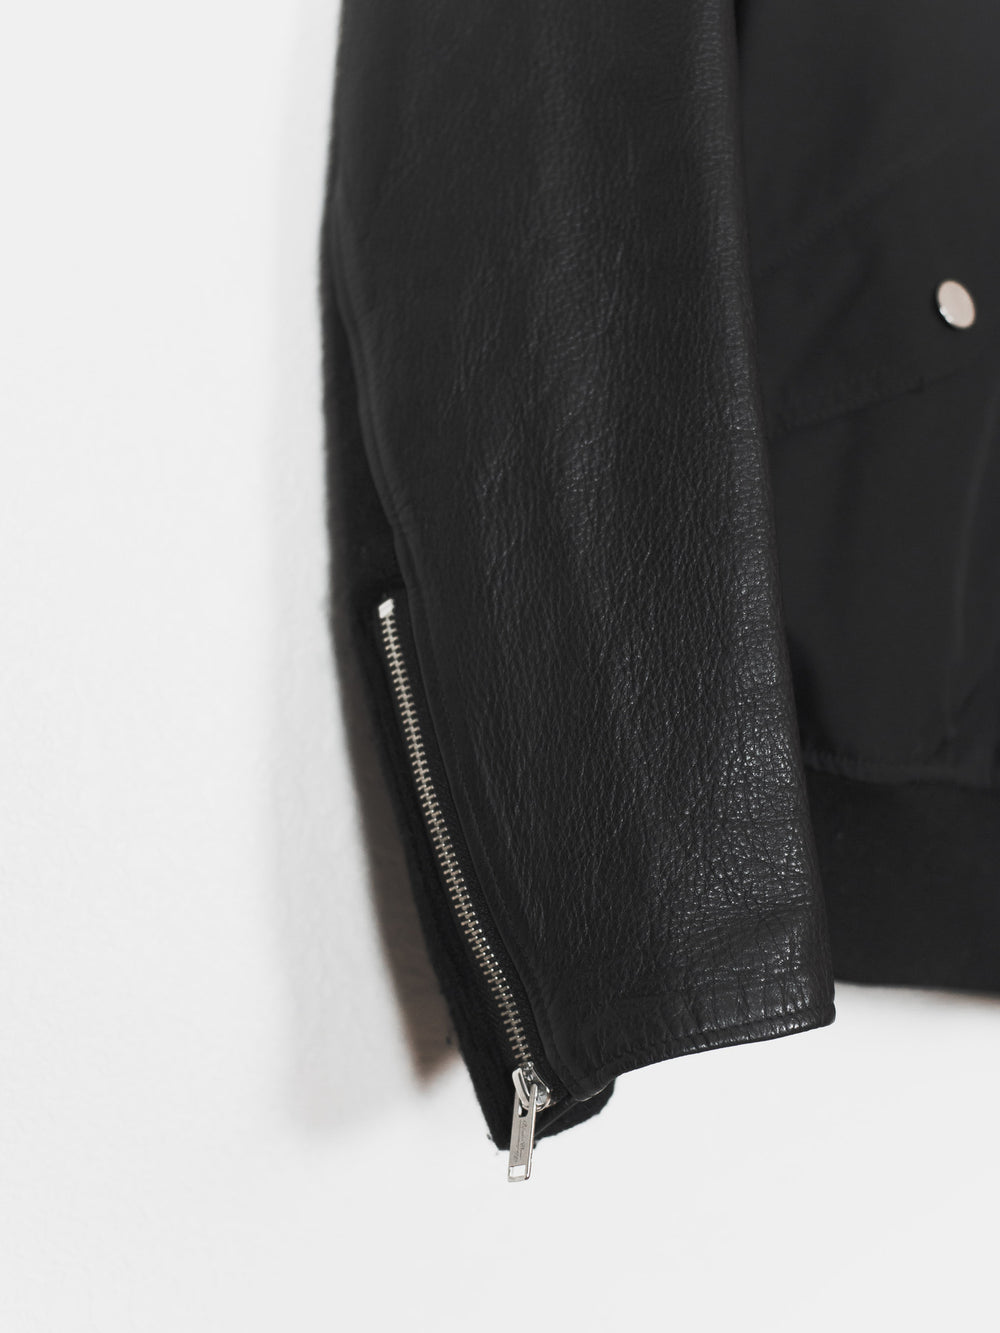 Undercover AW11 Mirror Leather Sleeve Ma-1 Bomber